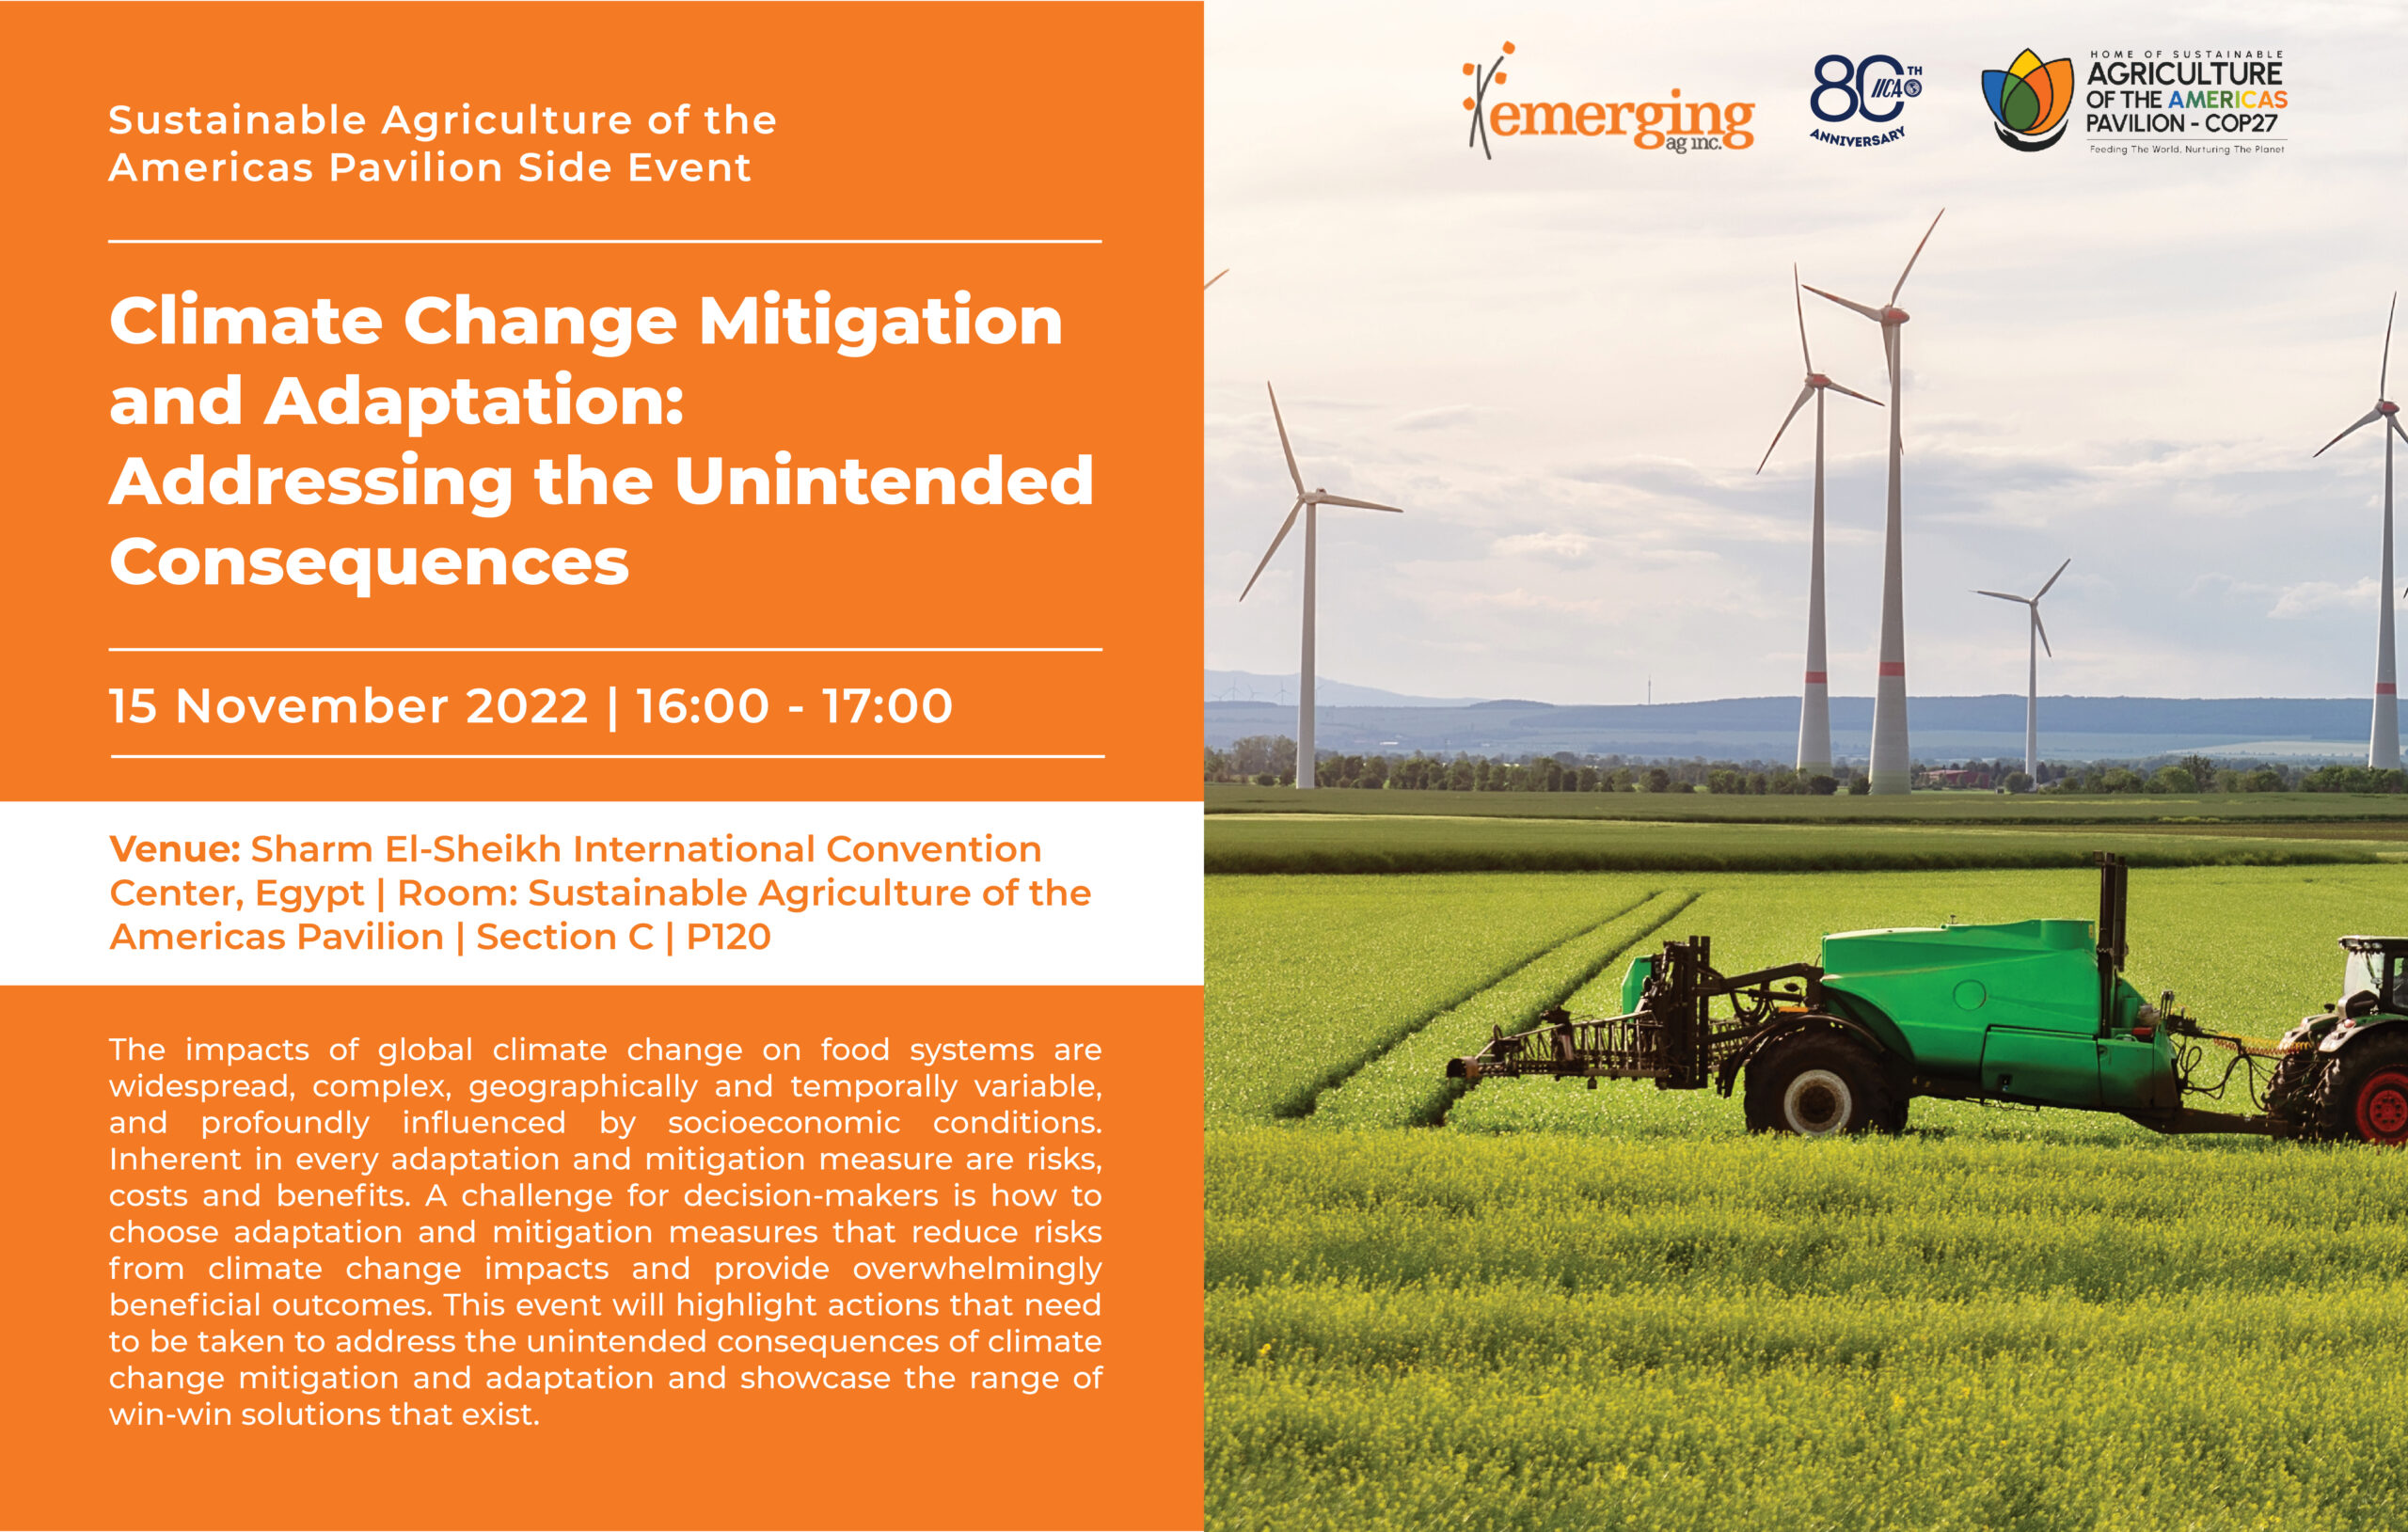 Climate Change Mitigation and Adaptation: Addressing the Unintended Consequences